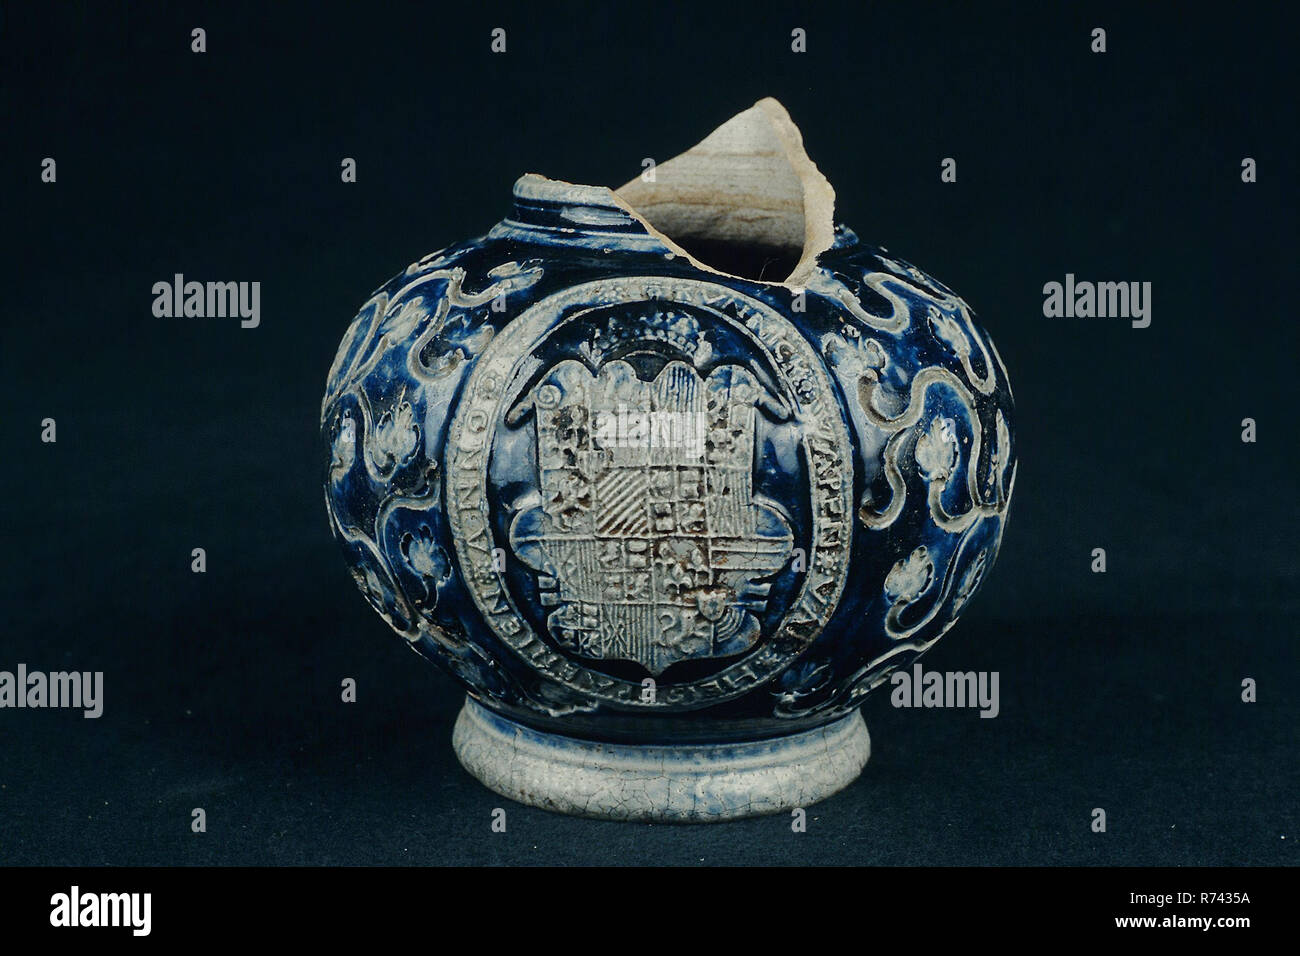 Fragment stoneware bell jar with crowned coat of arms in medallion, sgraffito and blue glaze, Bullet chuck jug crockery holder soil find ceramic stoneware glaze salt glaze, hand turned stamped molded sgraffito glazed baked stoneware bulletbelly dark gray shard with salt glaze short pointed tail around the weapon medallion: KUNNICK. WEAPON OF HEISSPAENIEN. ANNO. (date missing) archeology heraldry import pottery serve serve serve drink wine beer king Hispanje Spain Stock Photo